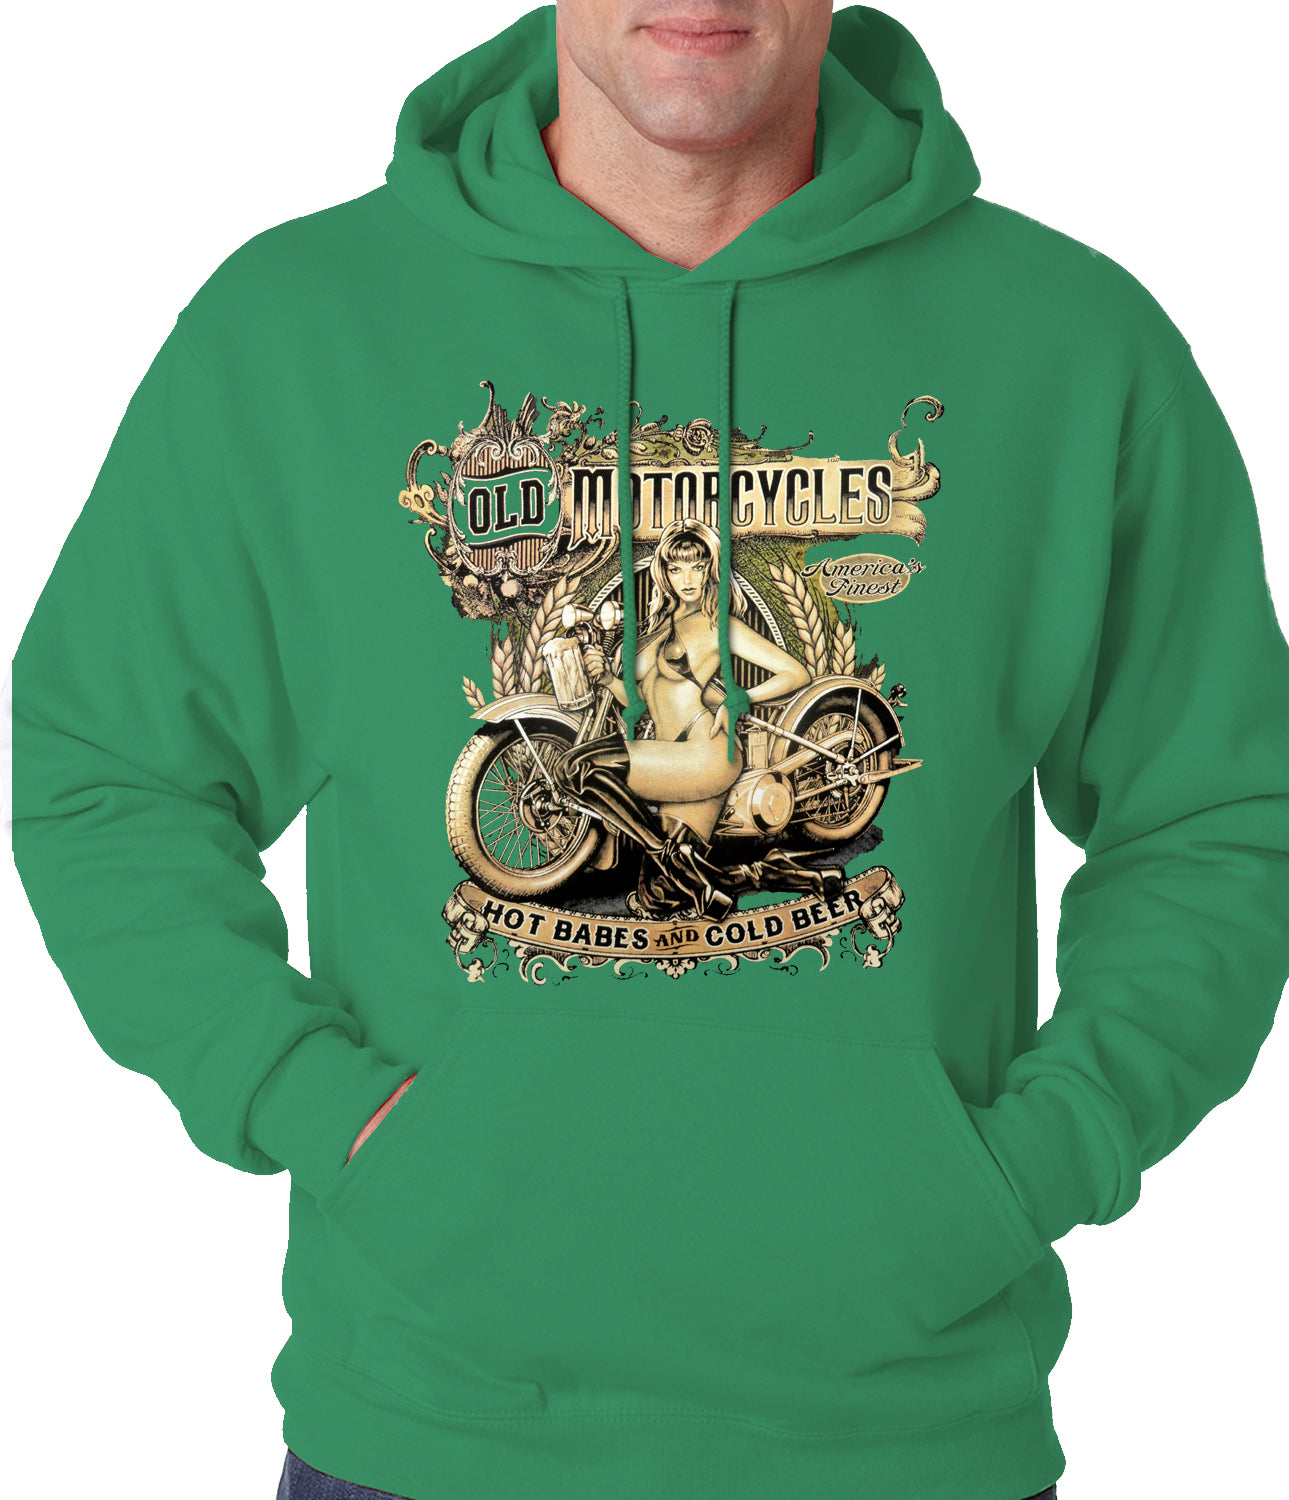 Hot Babes and Cold Beer Biker Adult Hoodie